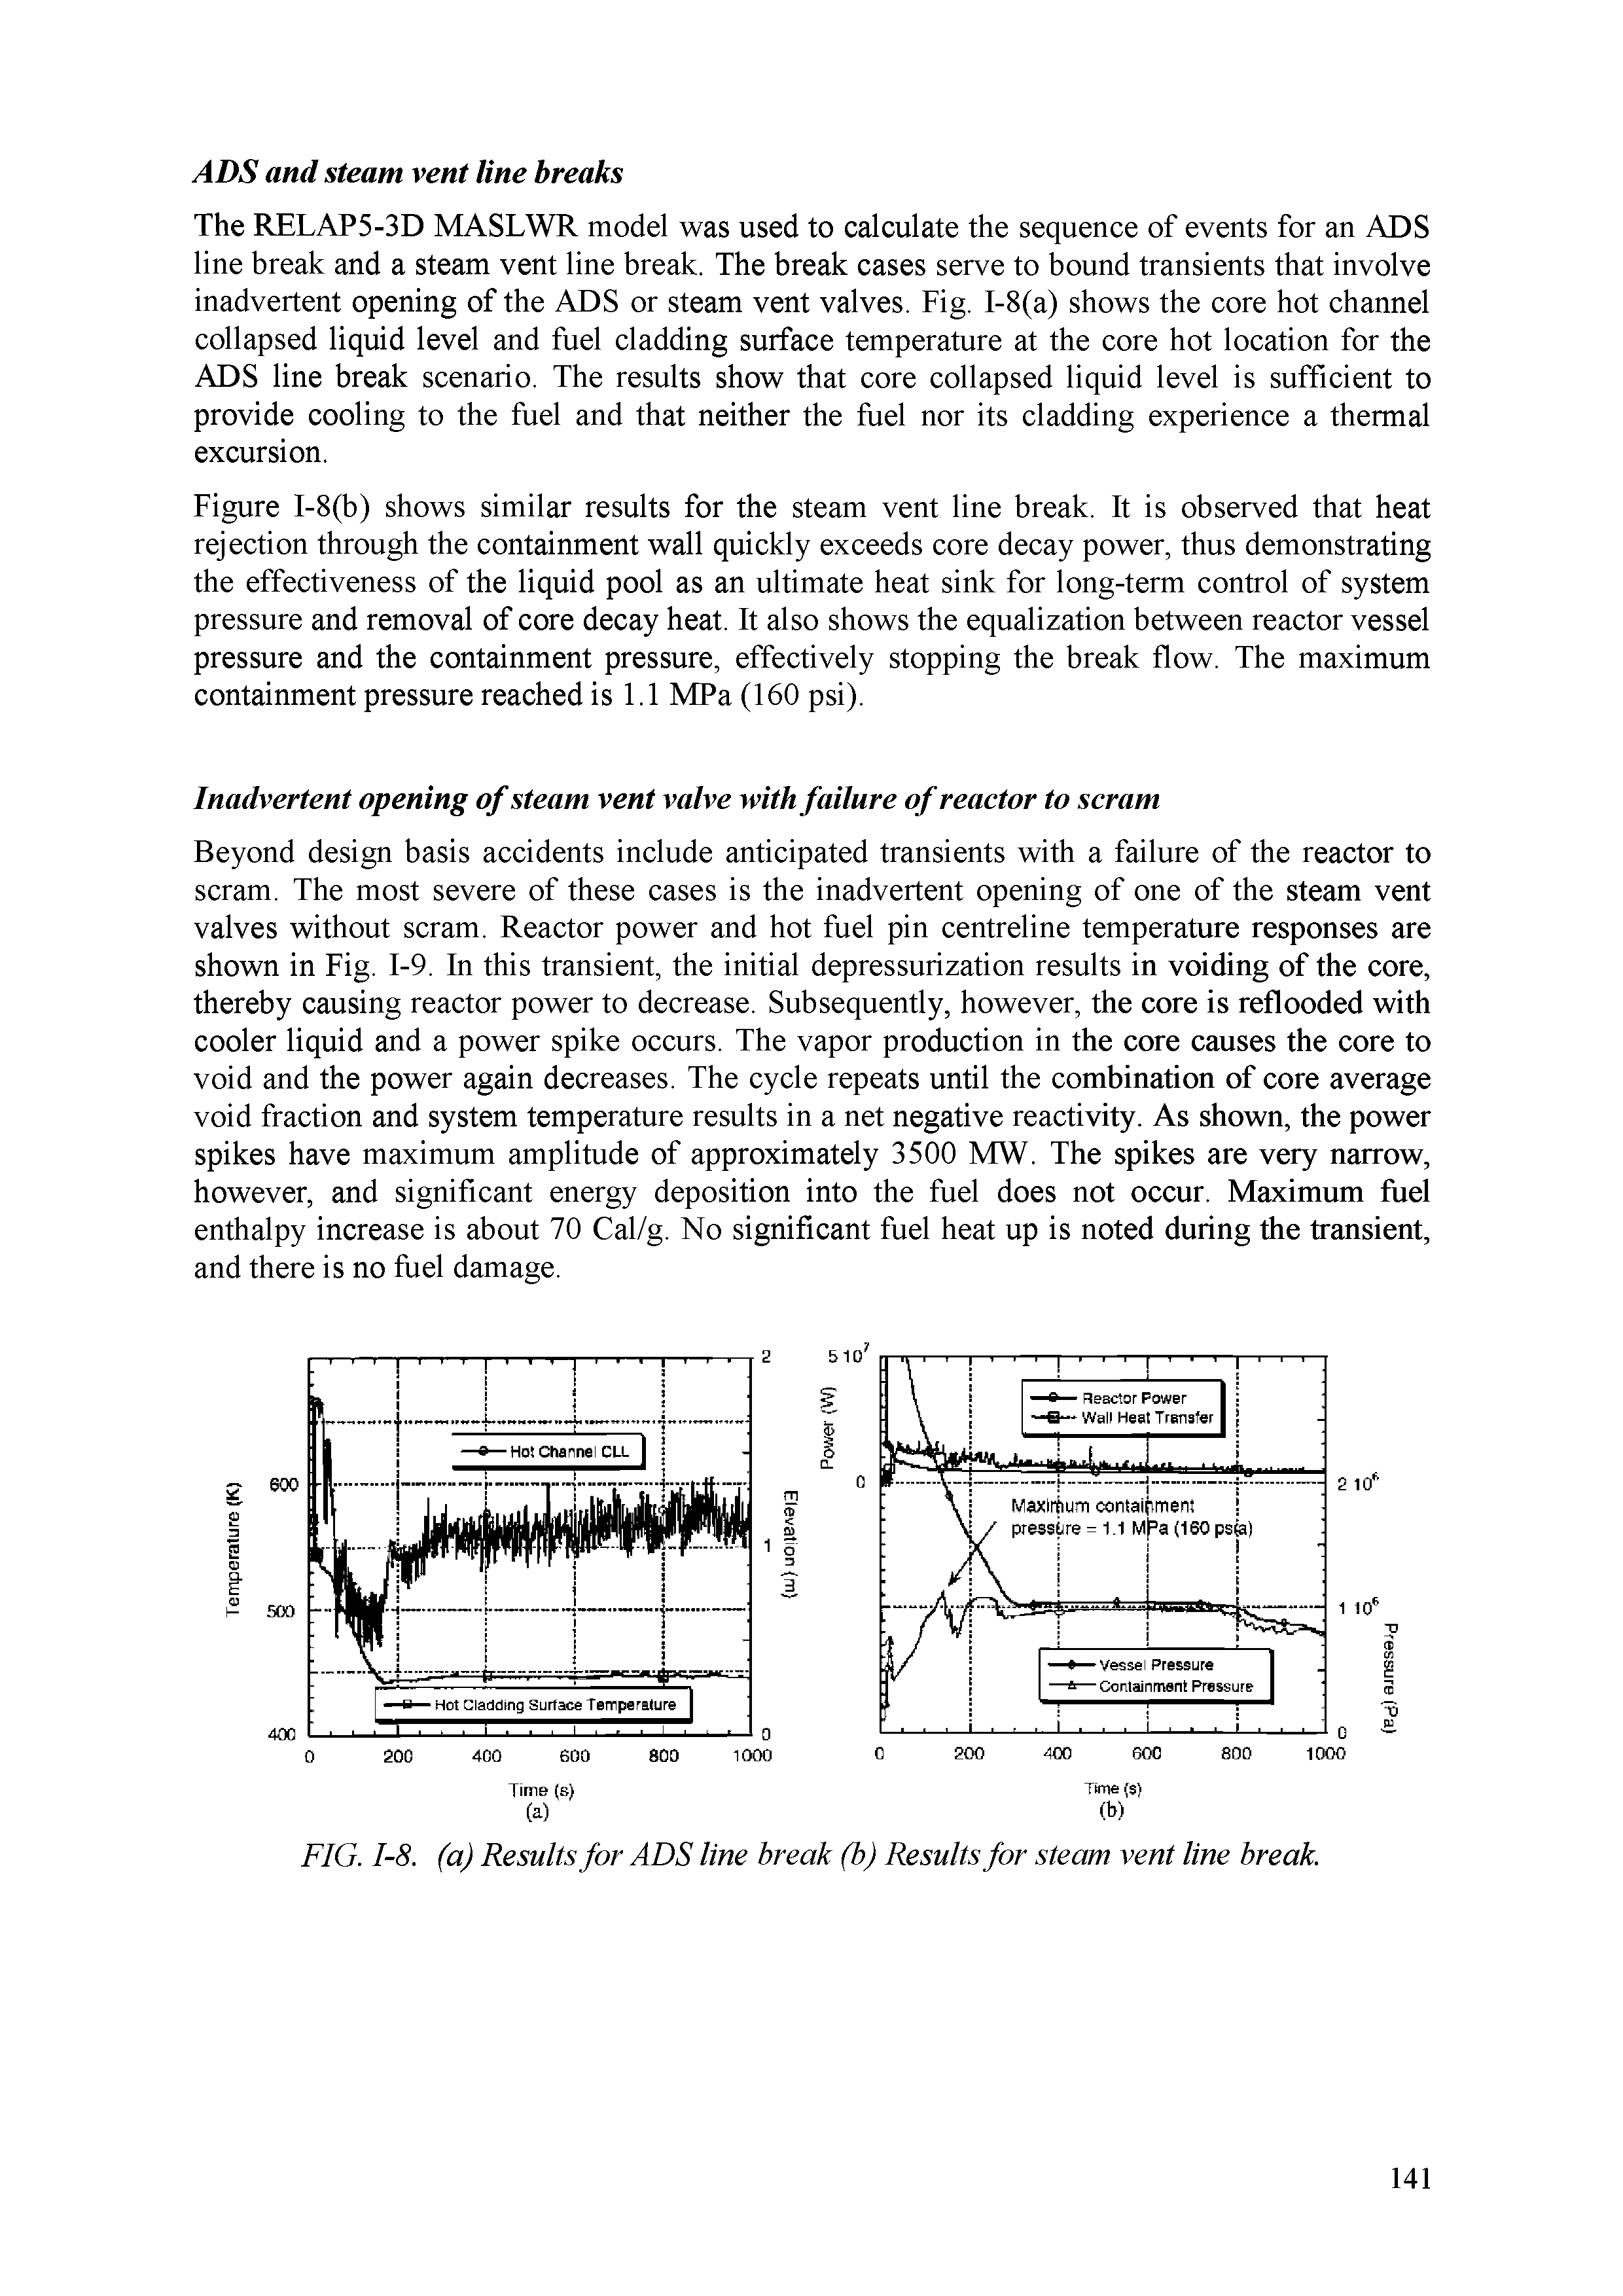 Figure I-8(b) shows similar results for the steam vent line break. It is observed that heat rejection through the containment wall quickly exceeds core decay power, thus demonstrating the effectiveness of the liquid pool as an ultimate heat sink for long-term control of system pressure and removal of core decay heat. It also shows the equalization between reactor vessel pressure and the containment pressure, effectively stopping the break flow. The maximum containment pressure reached is 1.1 MPa (160 psi).